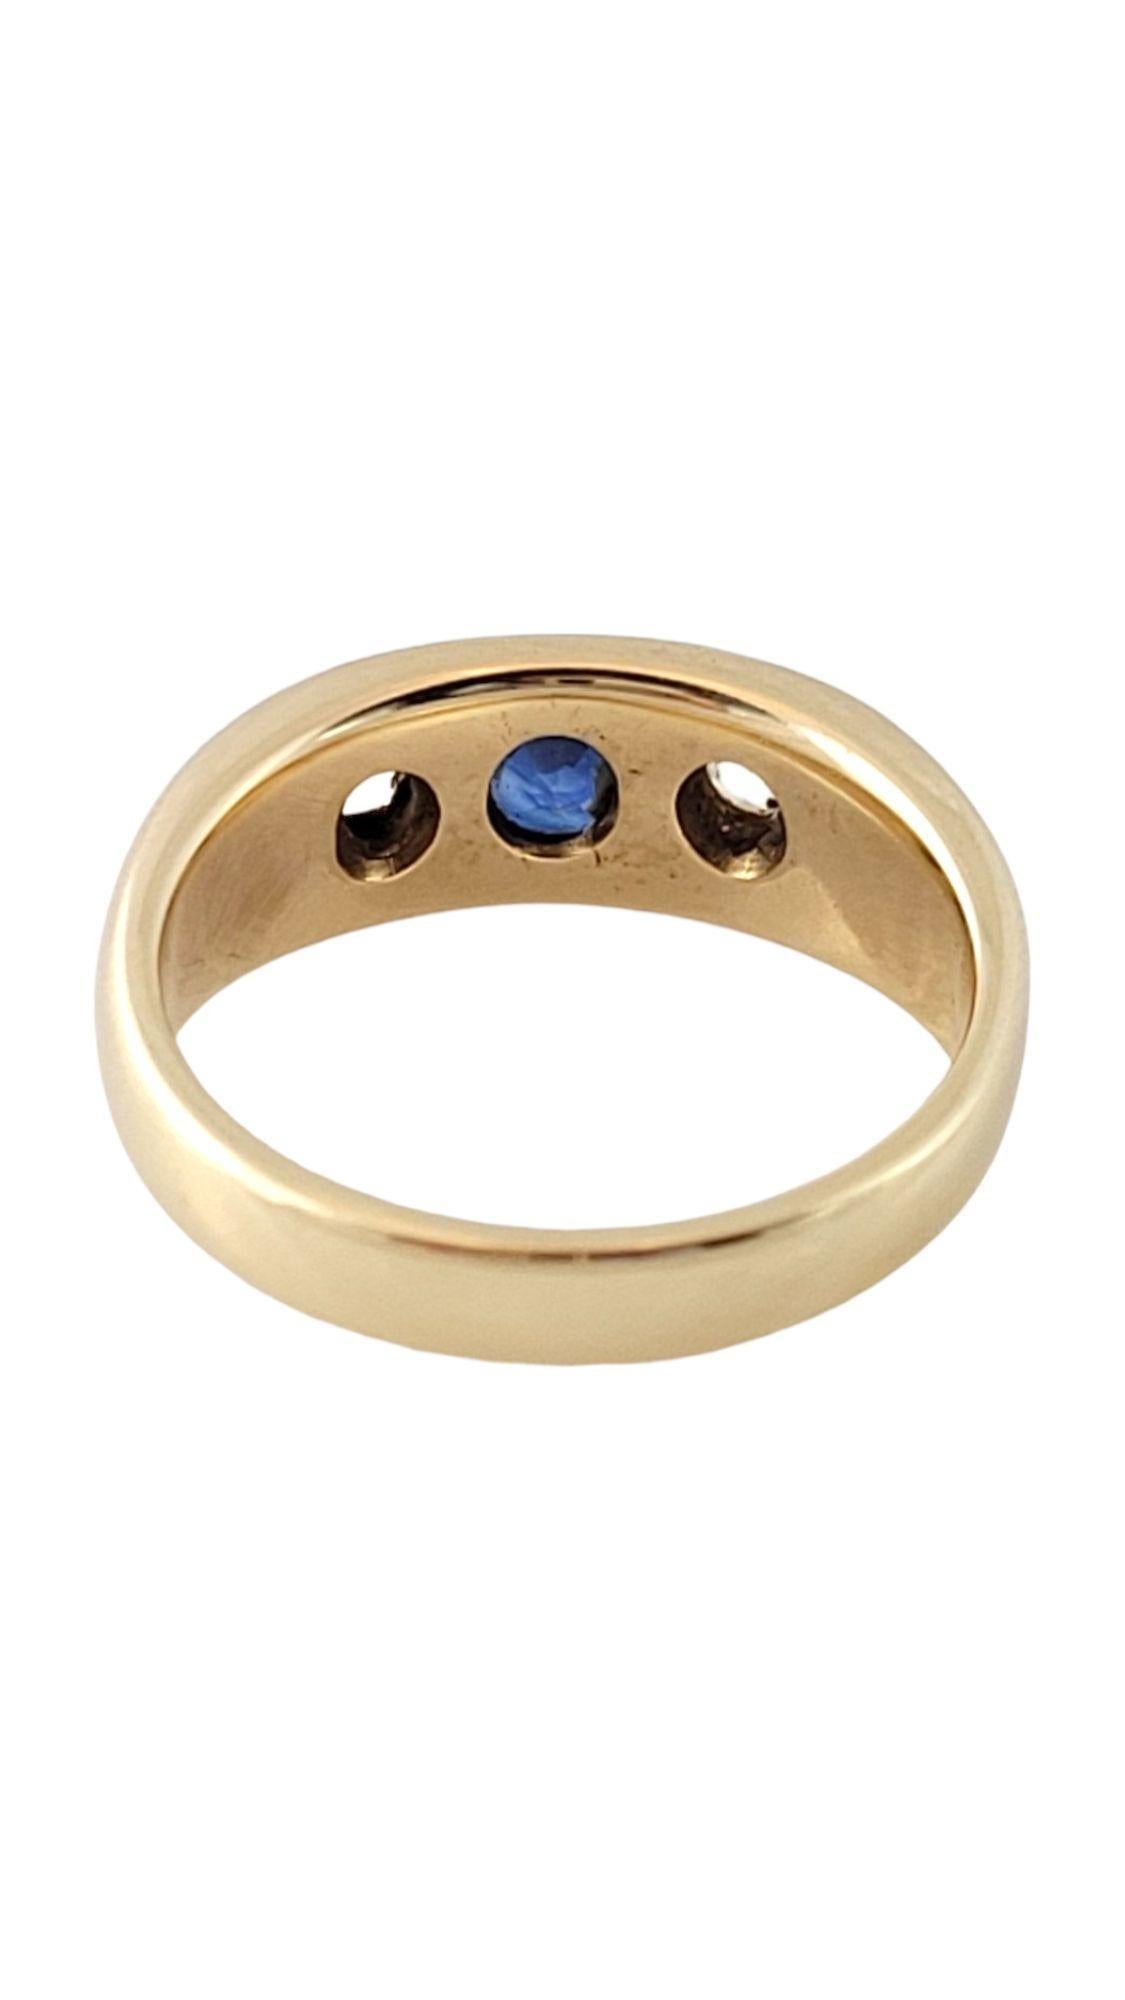  10K Yellow Gold Diamond Natural  Sapphire Ring Size 6 #15016 In Good Condition For Sale In Washington Depot, CT